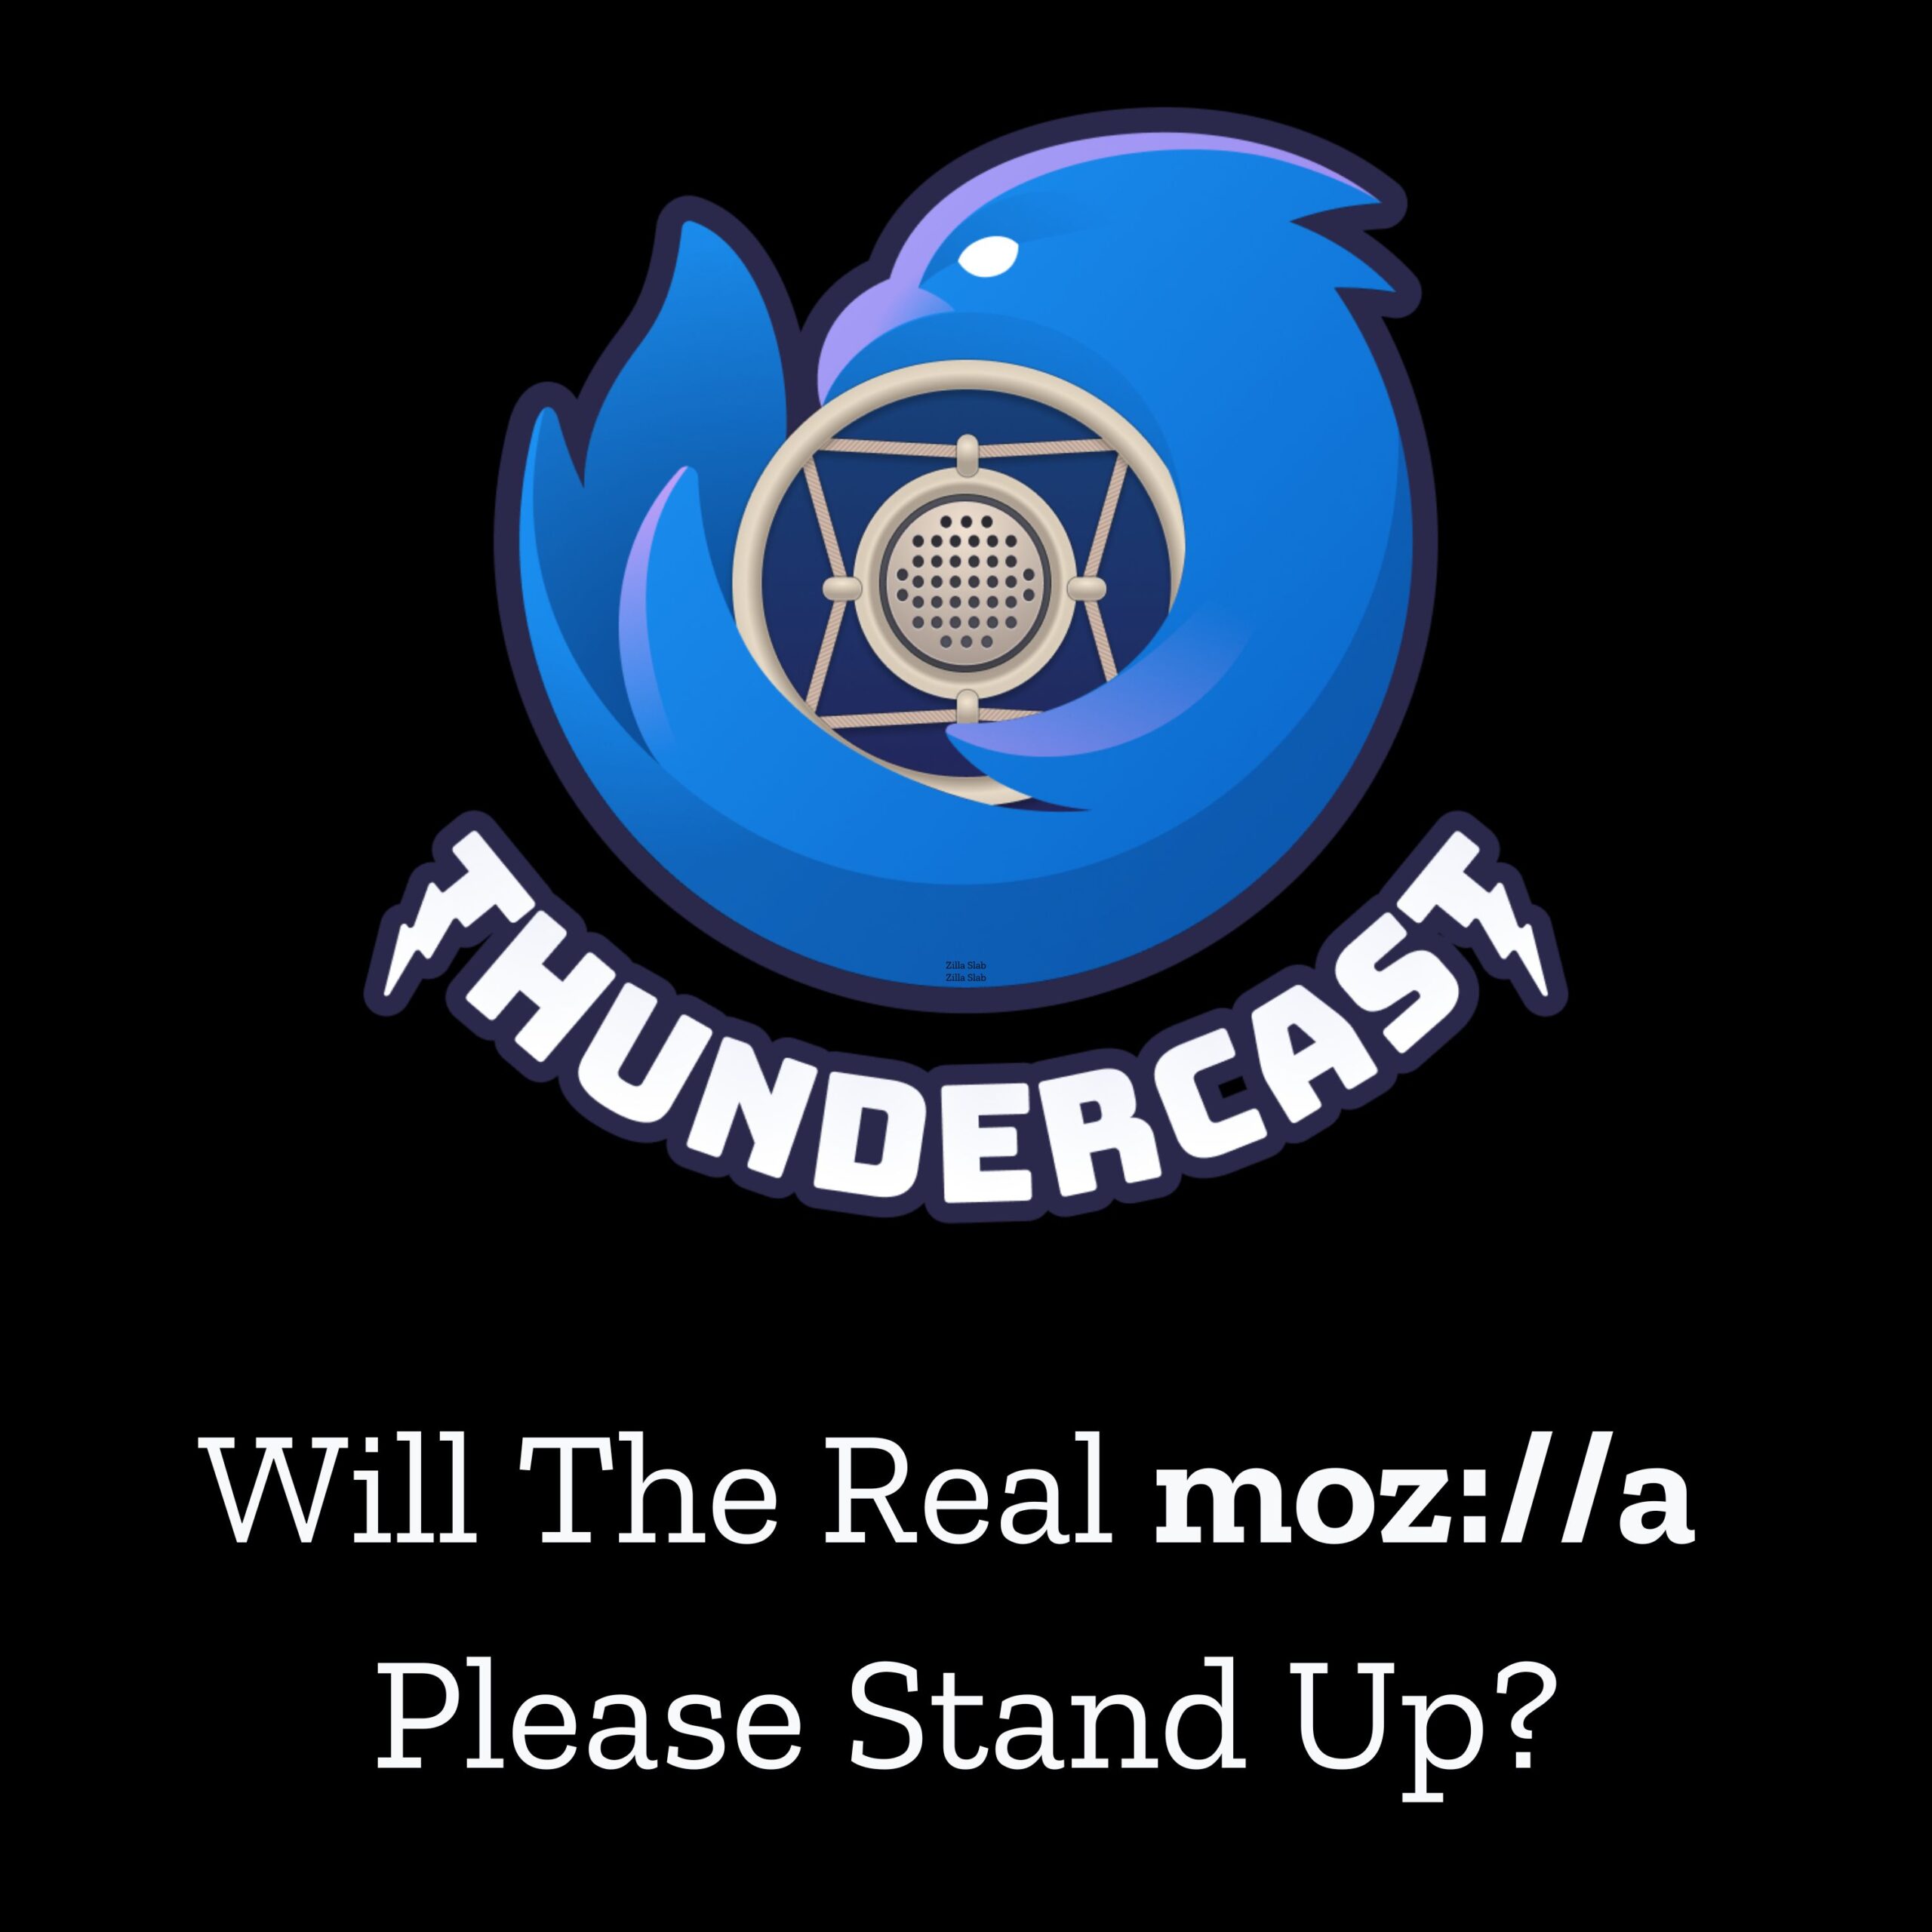 The Thunderbird logo is shown embracing a microphone. Underneath is the text "Will the real mozilla please stand up?"